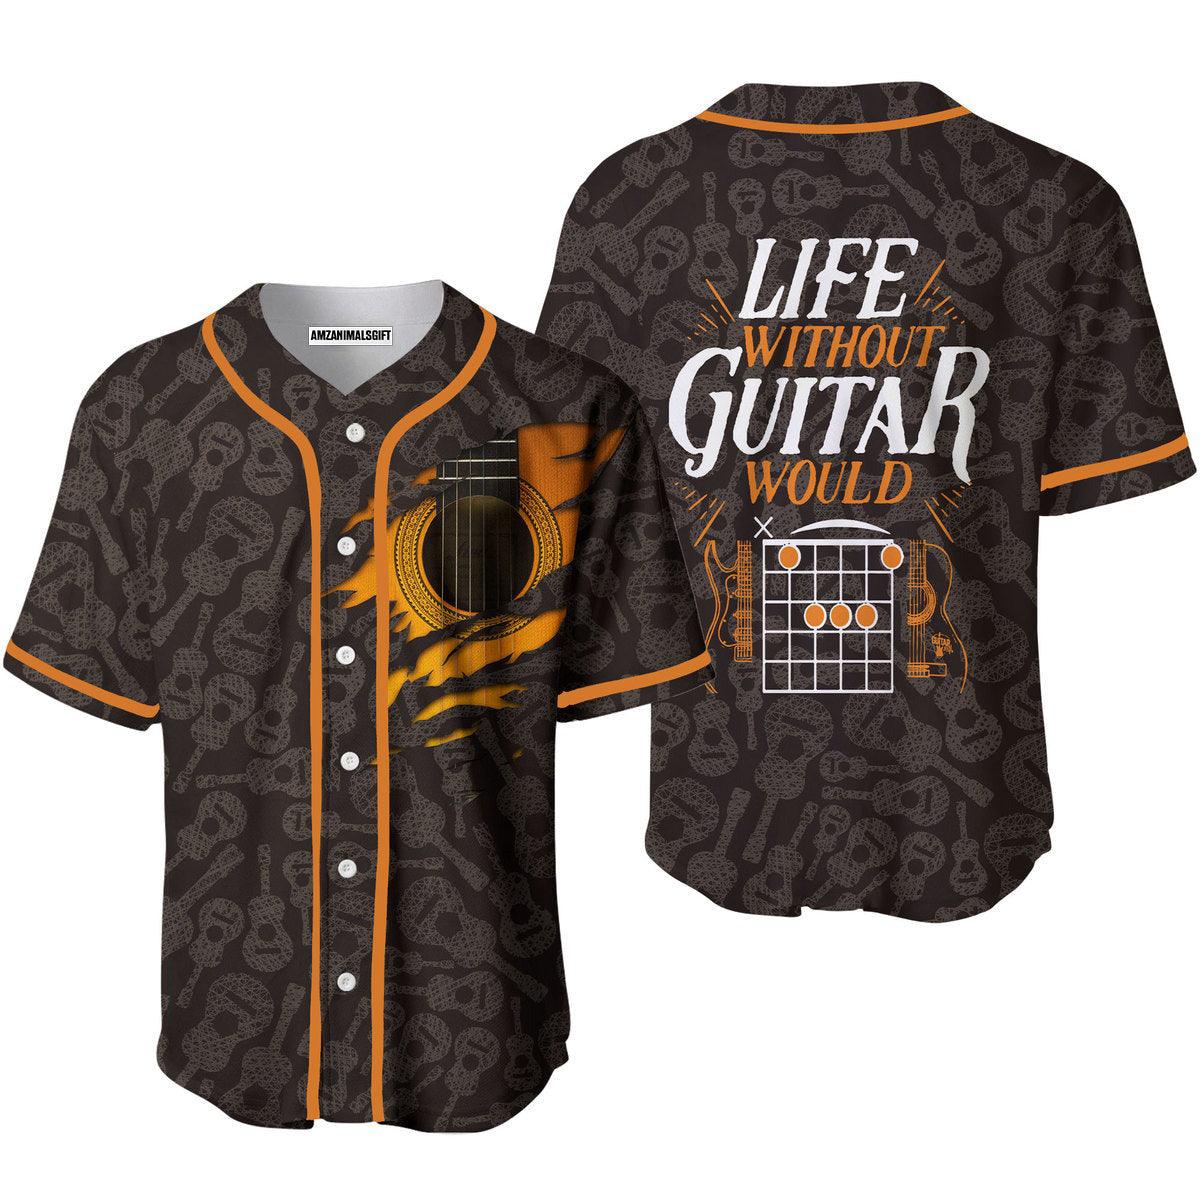 Guitar Baseball Jerseys, Life Without Guitar Would Be Flat Baseball Jerseys For Men And Women - Perfect Gift For Friend, Family - Amzanimalsgift